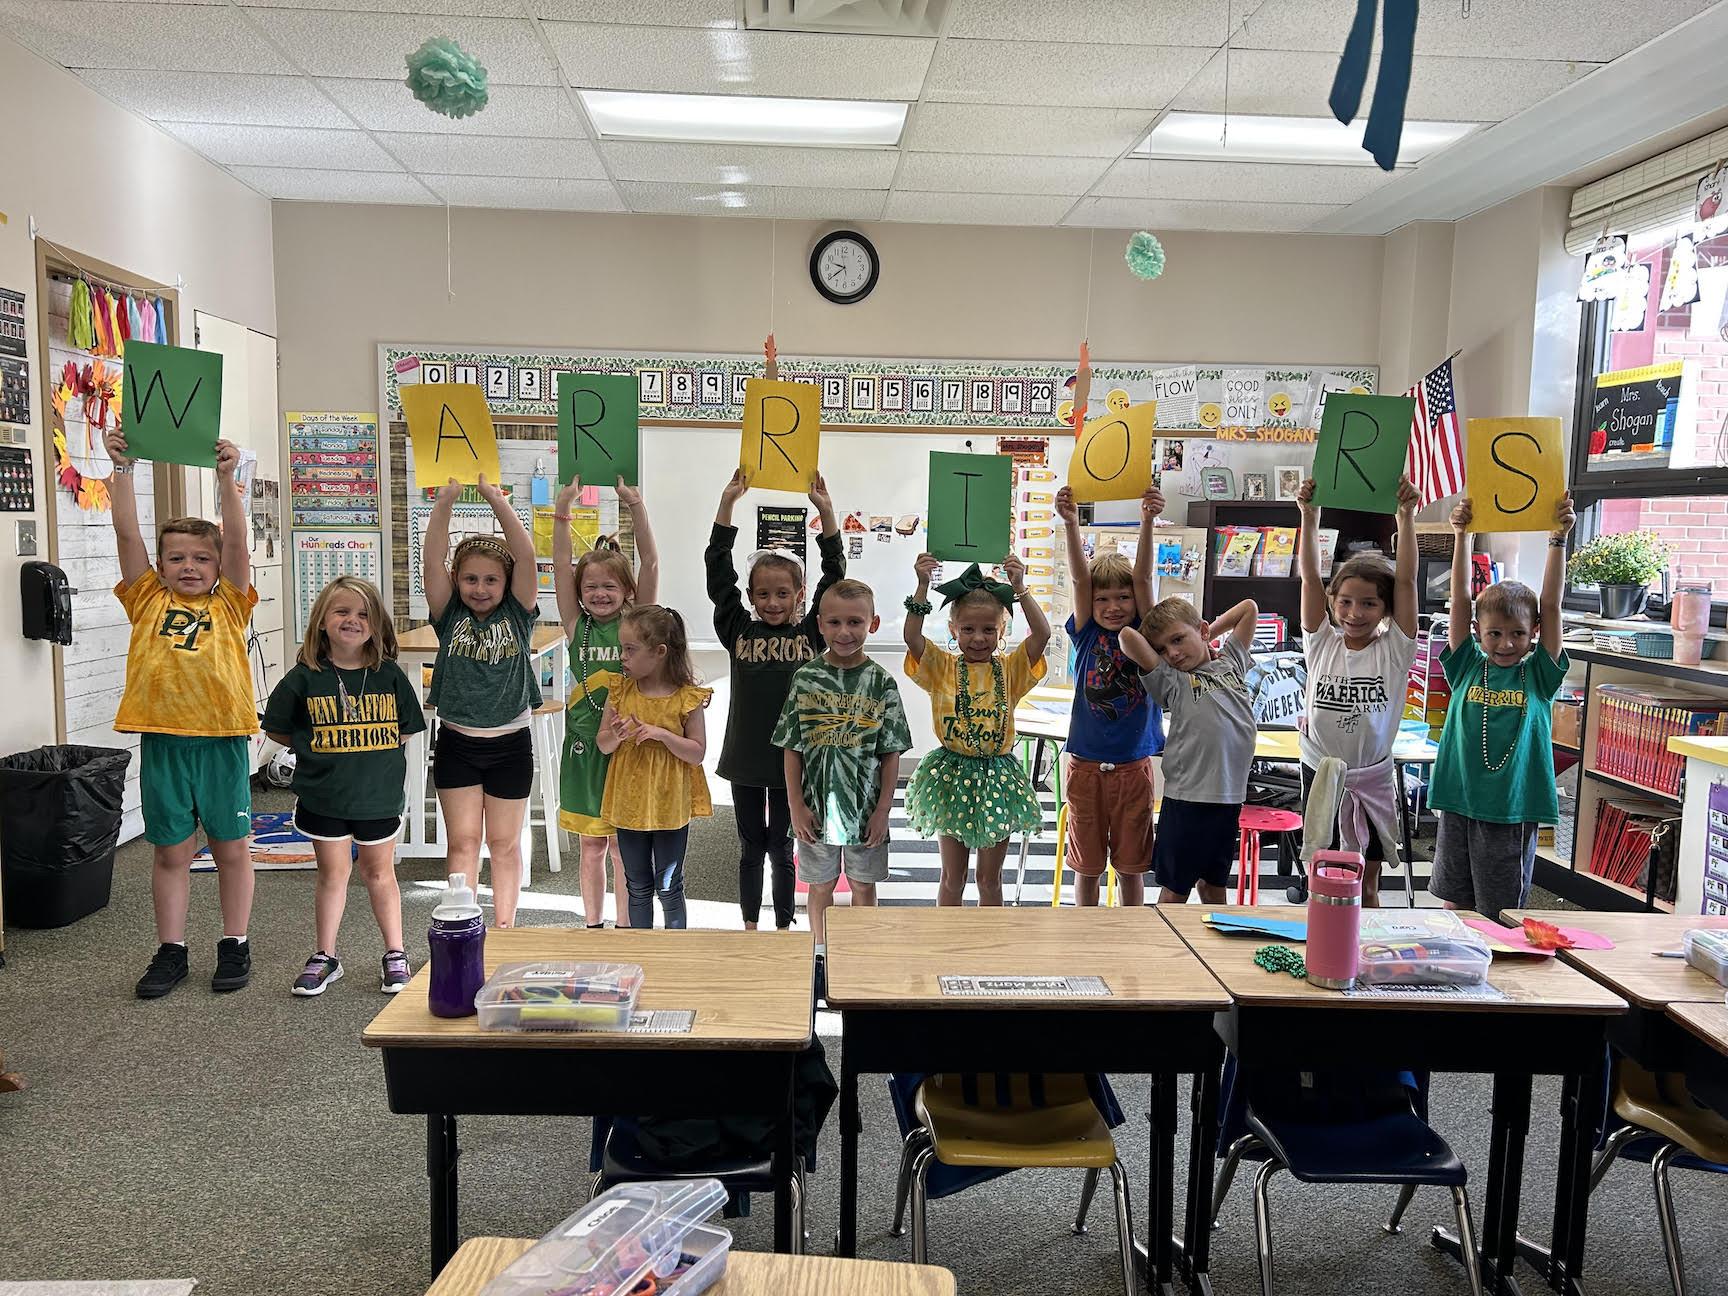 Mrs. Shogan’s 1st-graders at Level Green Elementary show their Warrior Pride on Green & Gold Friday